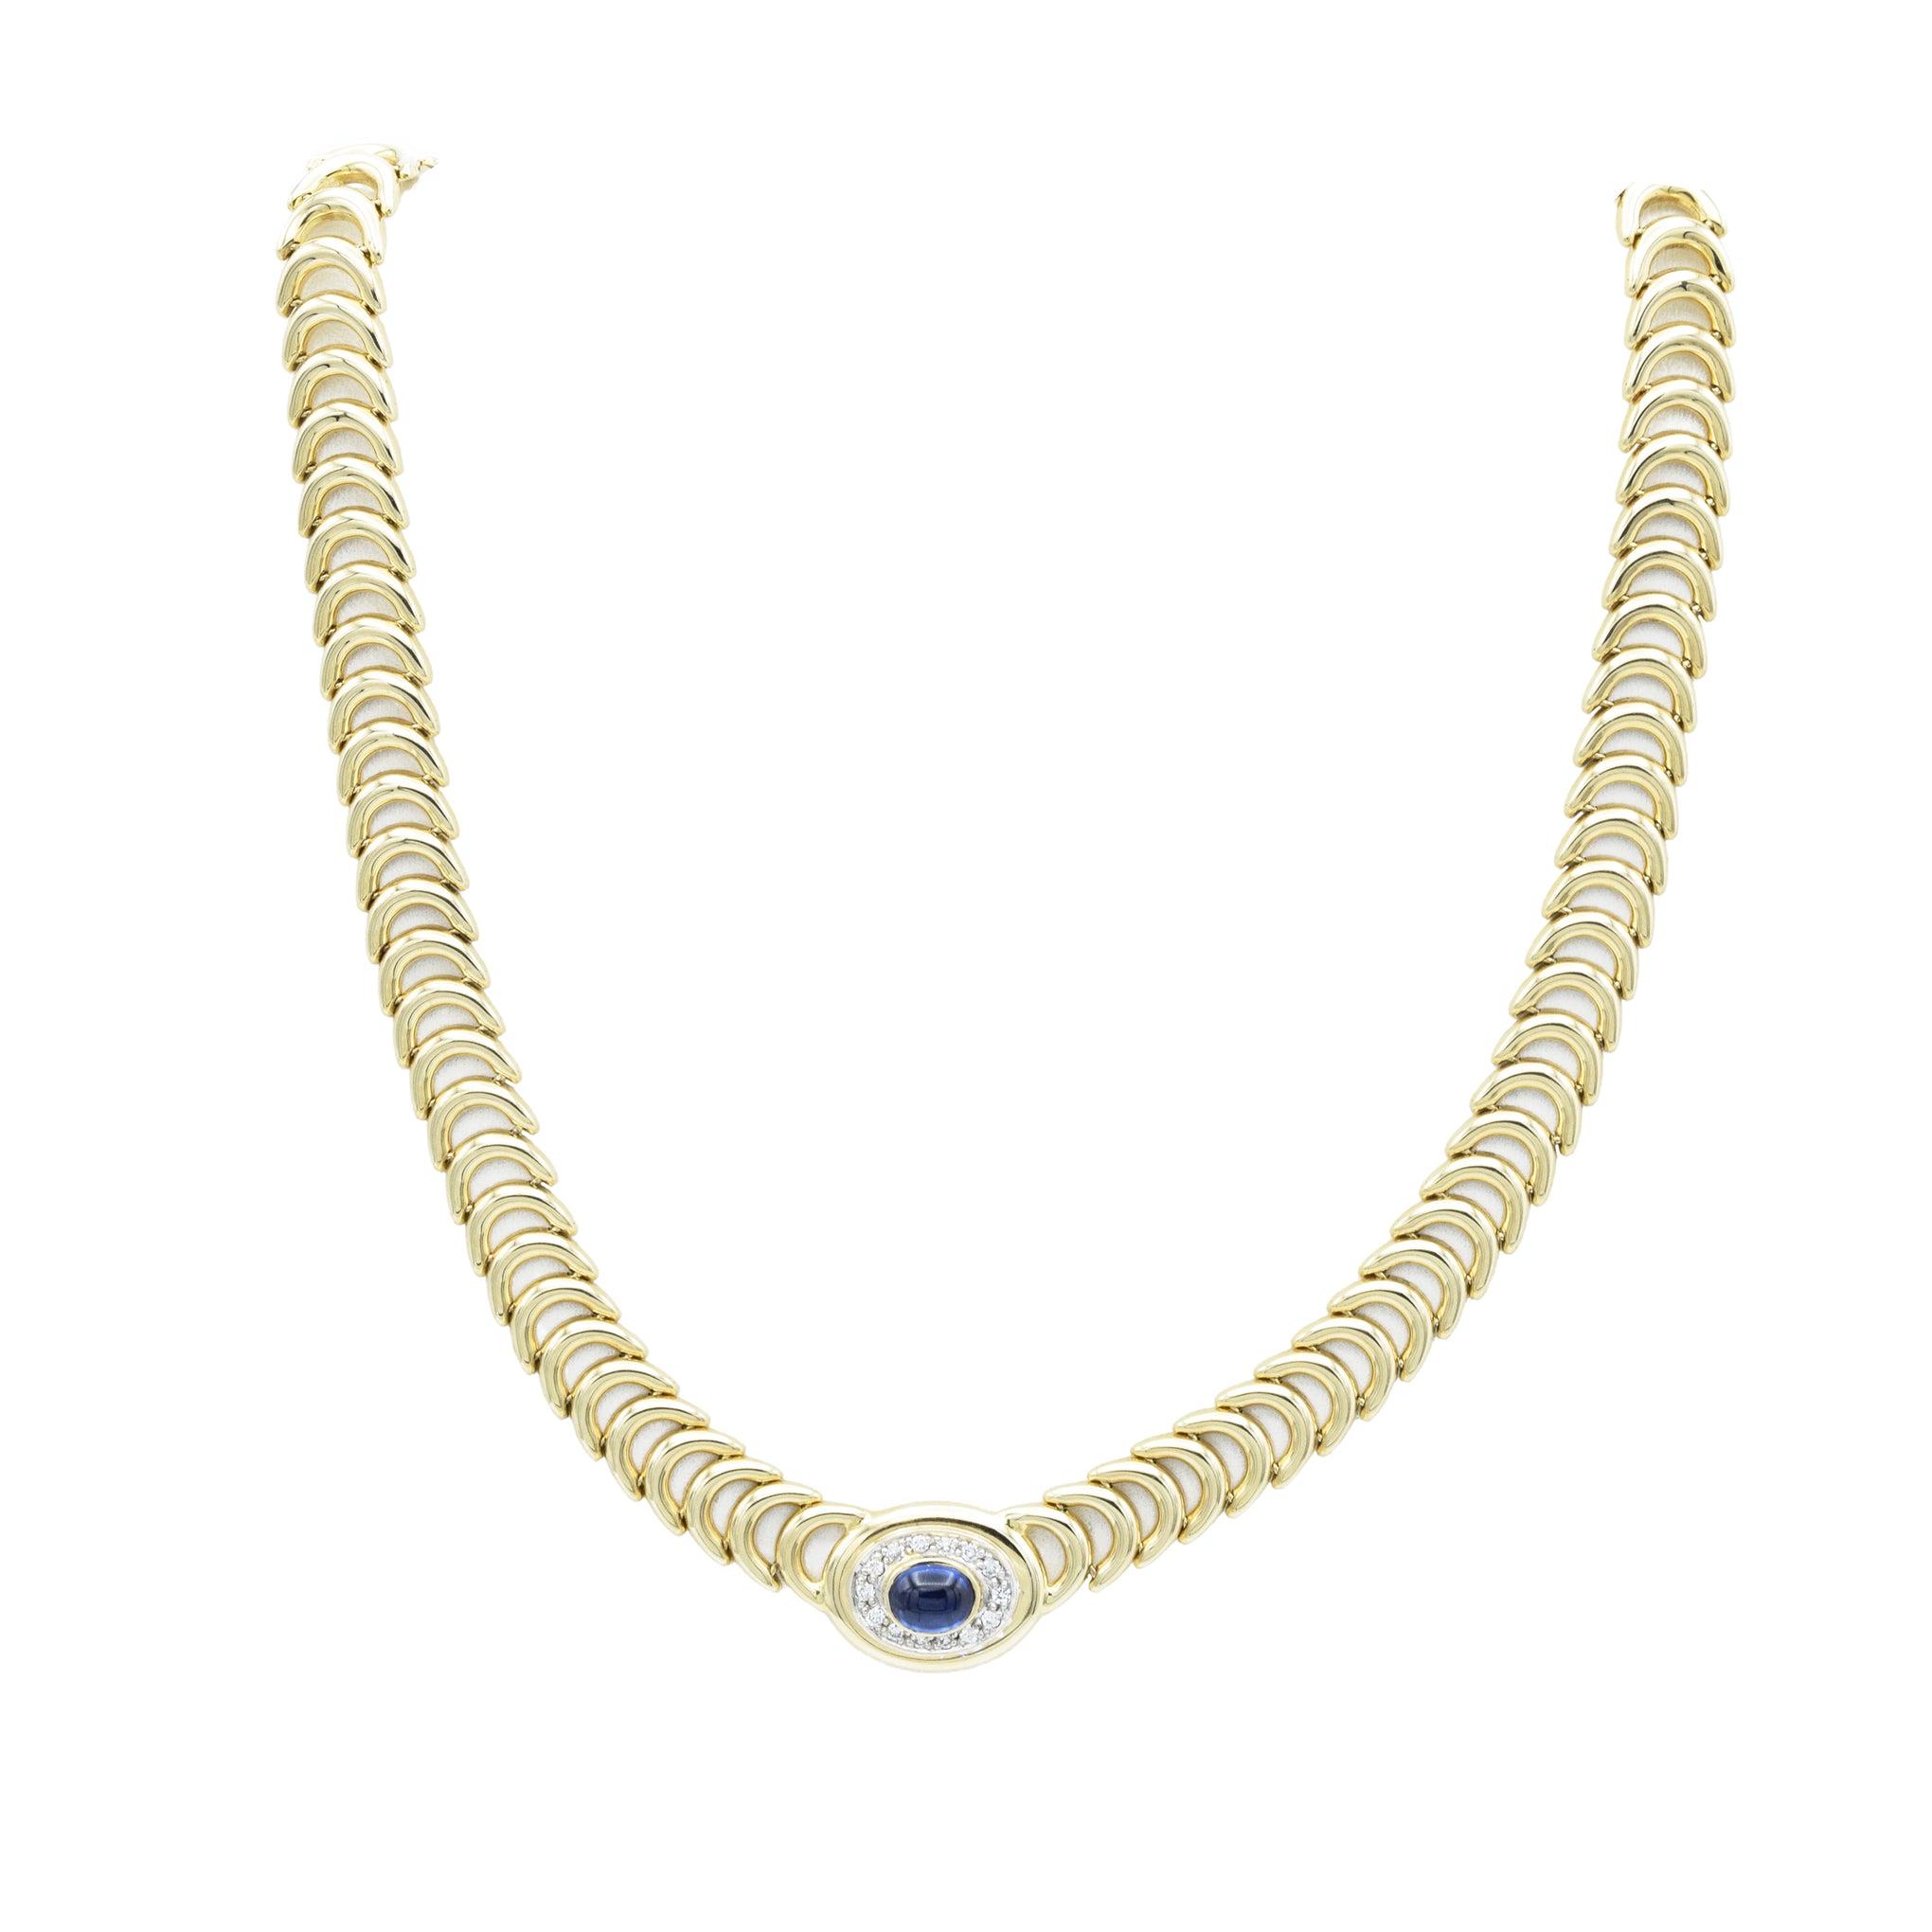 Vintage 1970s 14KT Yellow Gold Sapphire And Diamond Necklace